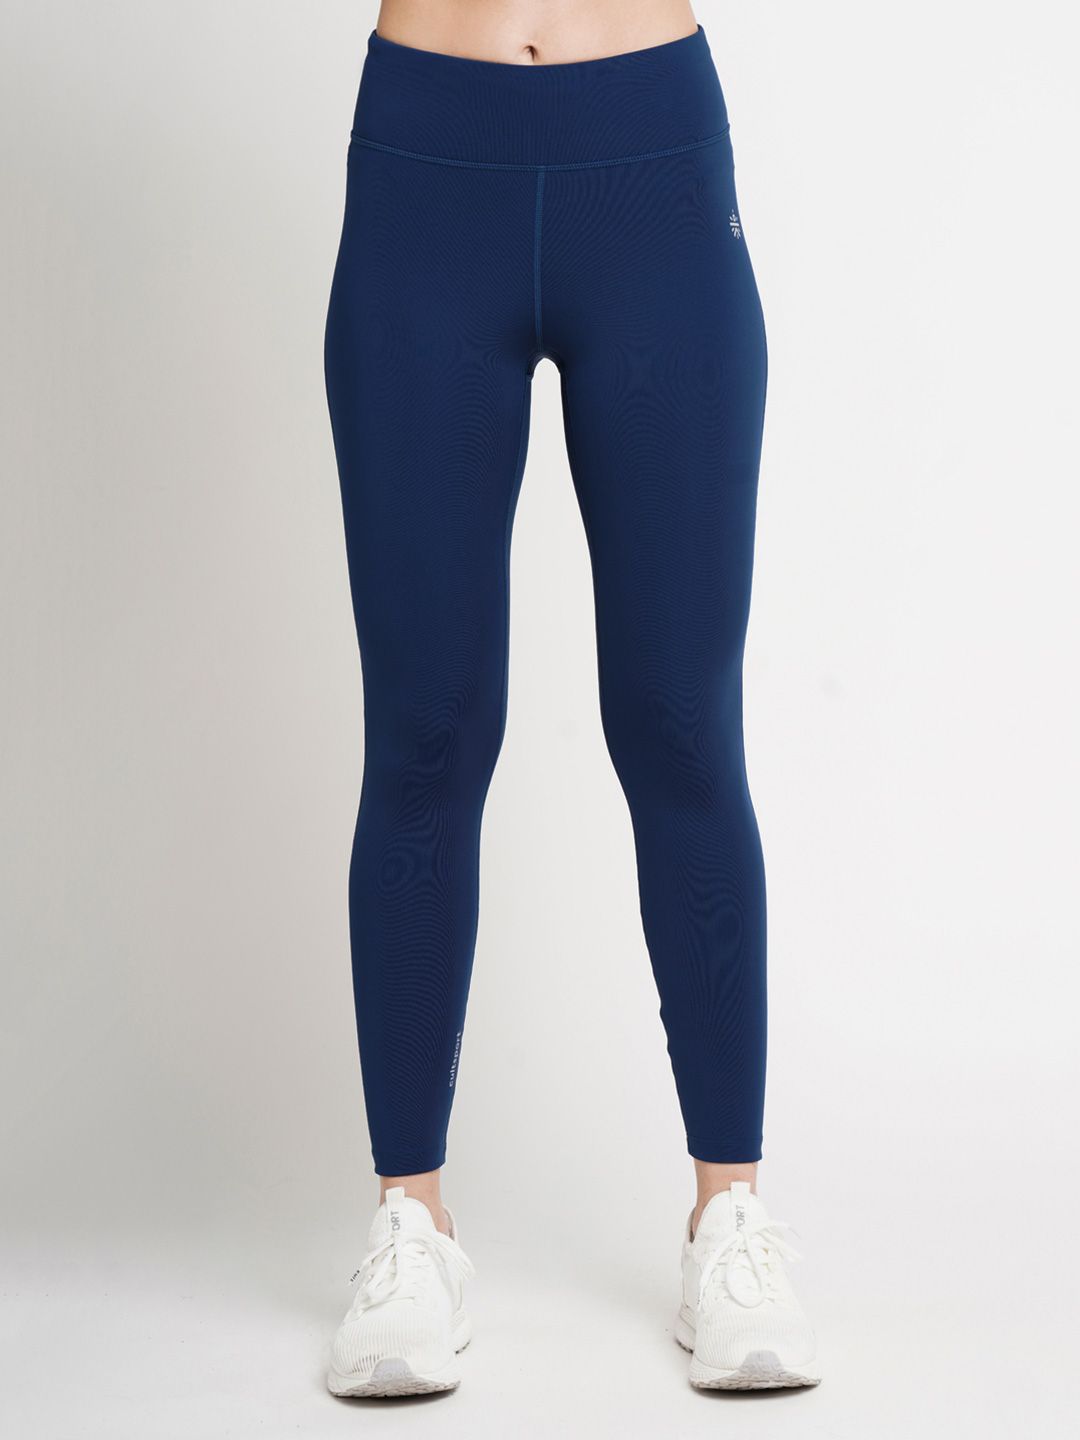 Cultsport Women Navy Blue Solid Tights Price in India